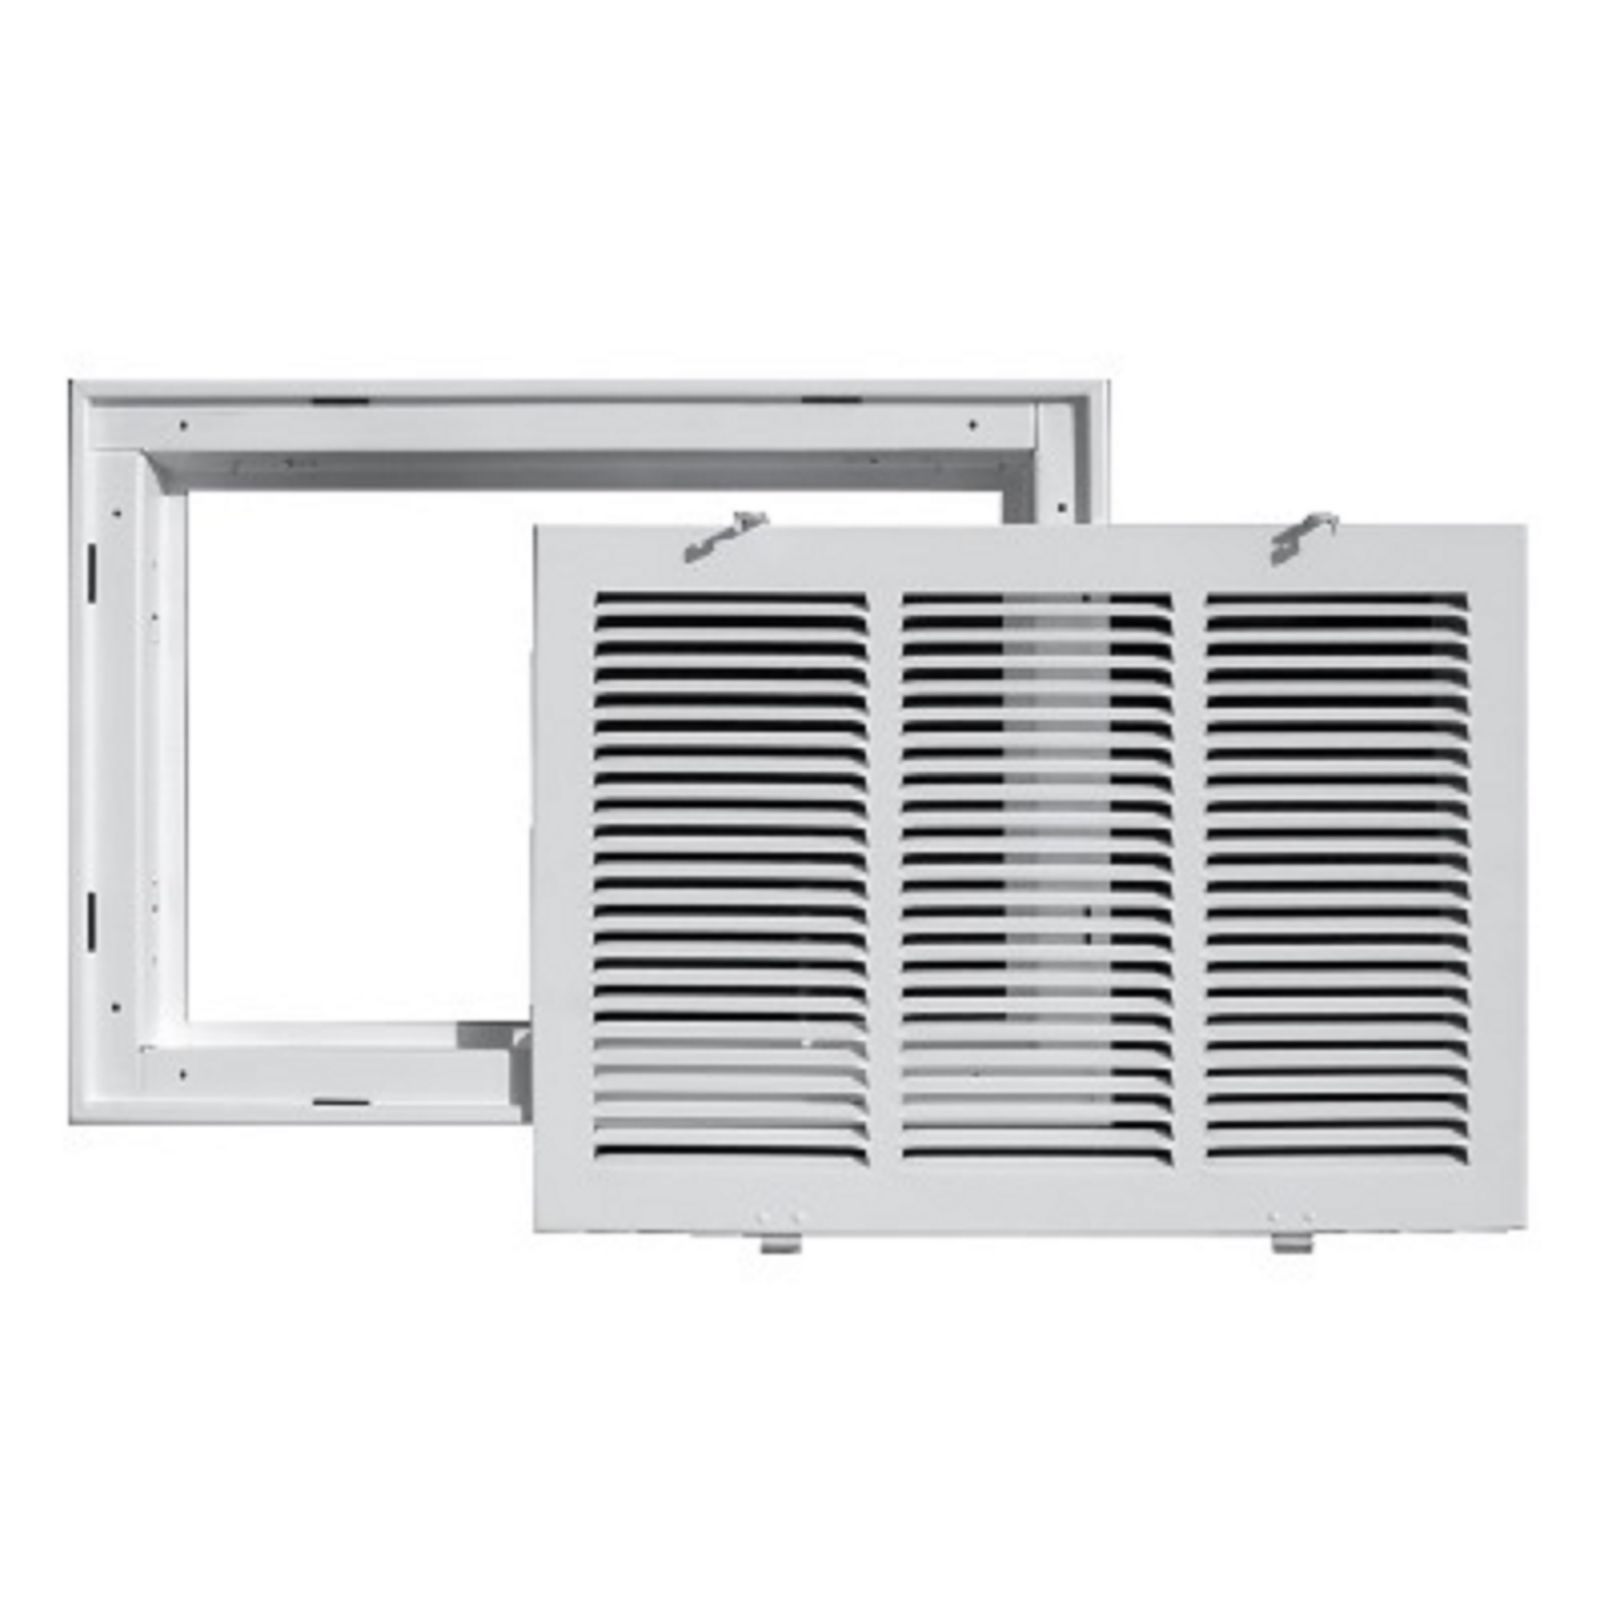 TRUaire 190RF 14X20 - Steel Return Air Filter Grille With Removable Face, White, 14" X 20"